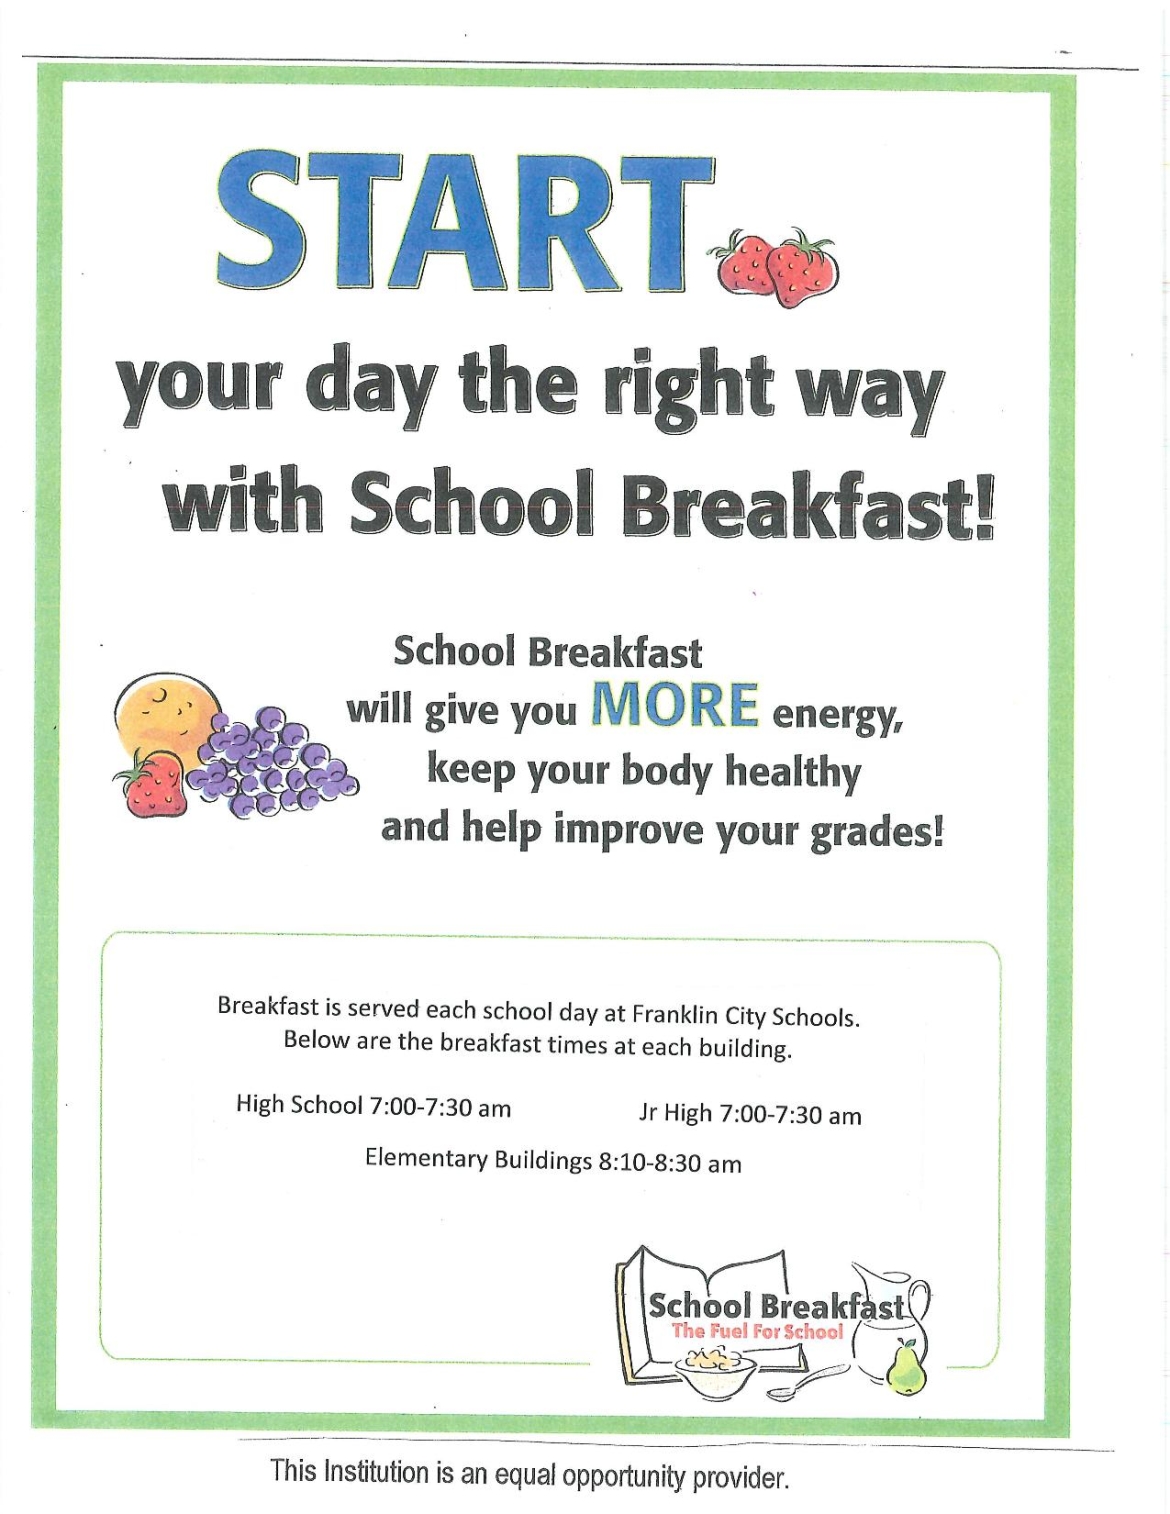 A flier with times that breakfast is served at Franklin City Schools.